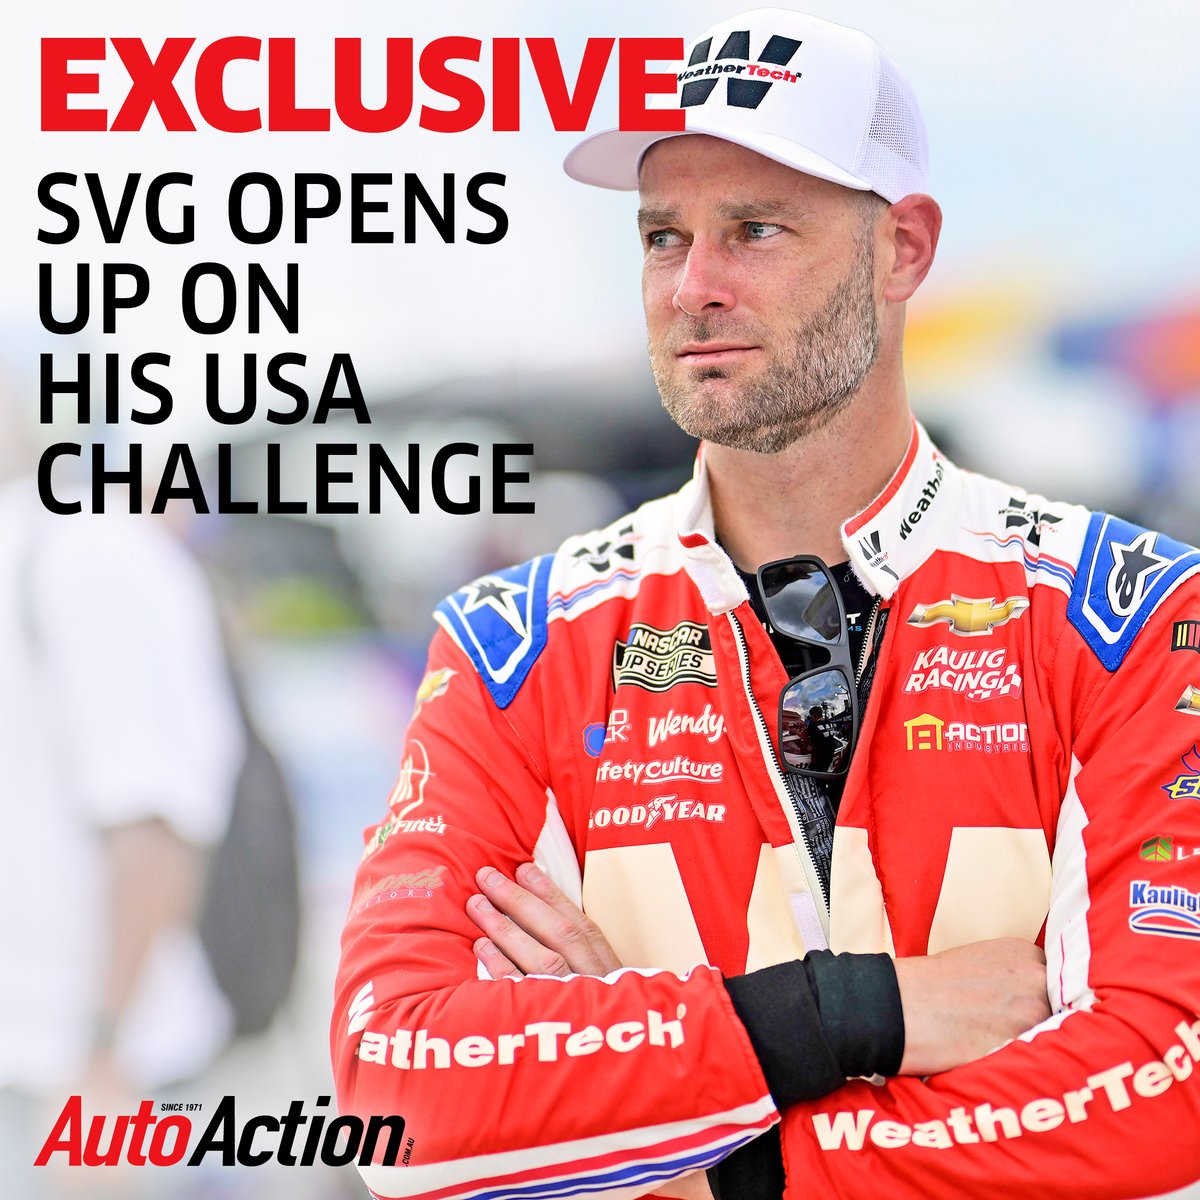 Read Part 1 of our exclusive one-on-one conversation with Shane van Gisbergen about his USA challenges! Out now in the latest FREE digital issue of Auto Action magazine! loom.ly/LGbgujU #shanevangisbergen #nascar #motorsport #autoactionmagazine #freedigitalmagazine